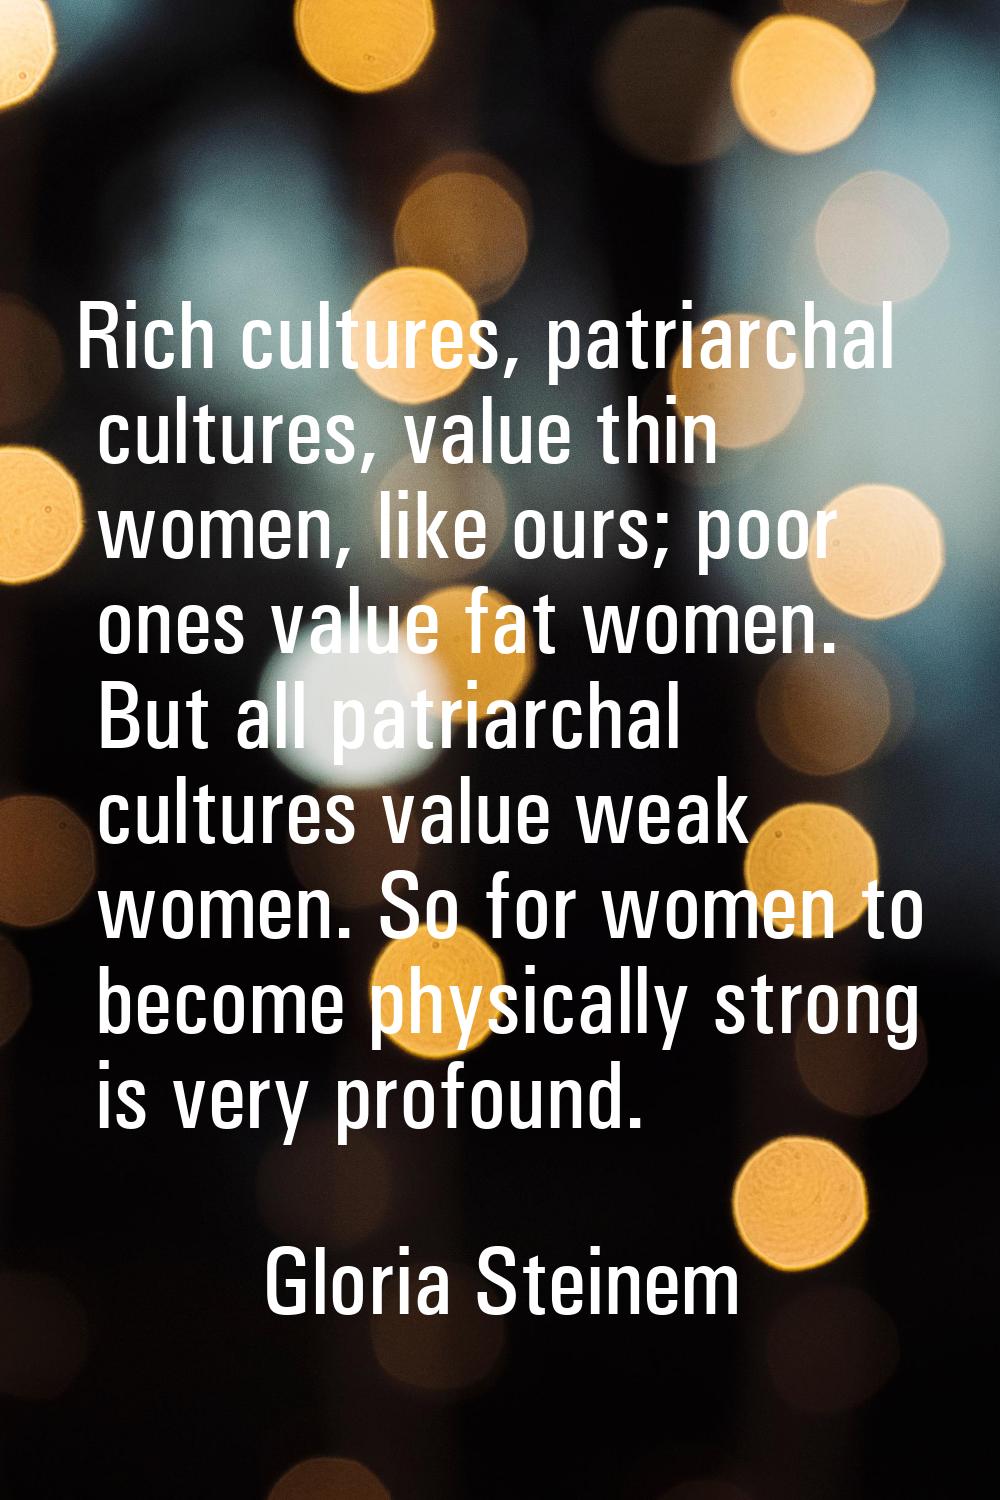 Rich cultures, patriarchal cultures, value thin women, like ours; poor ones value fat women. But al